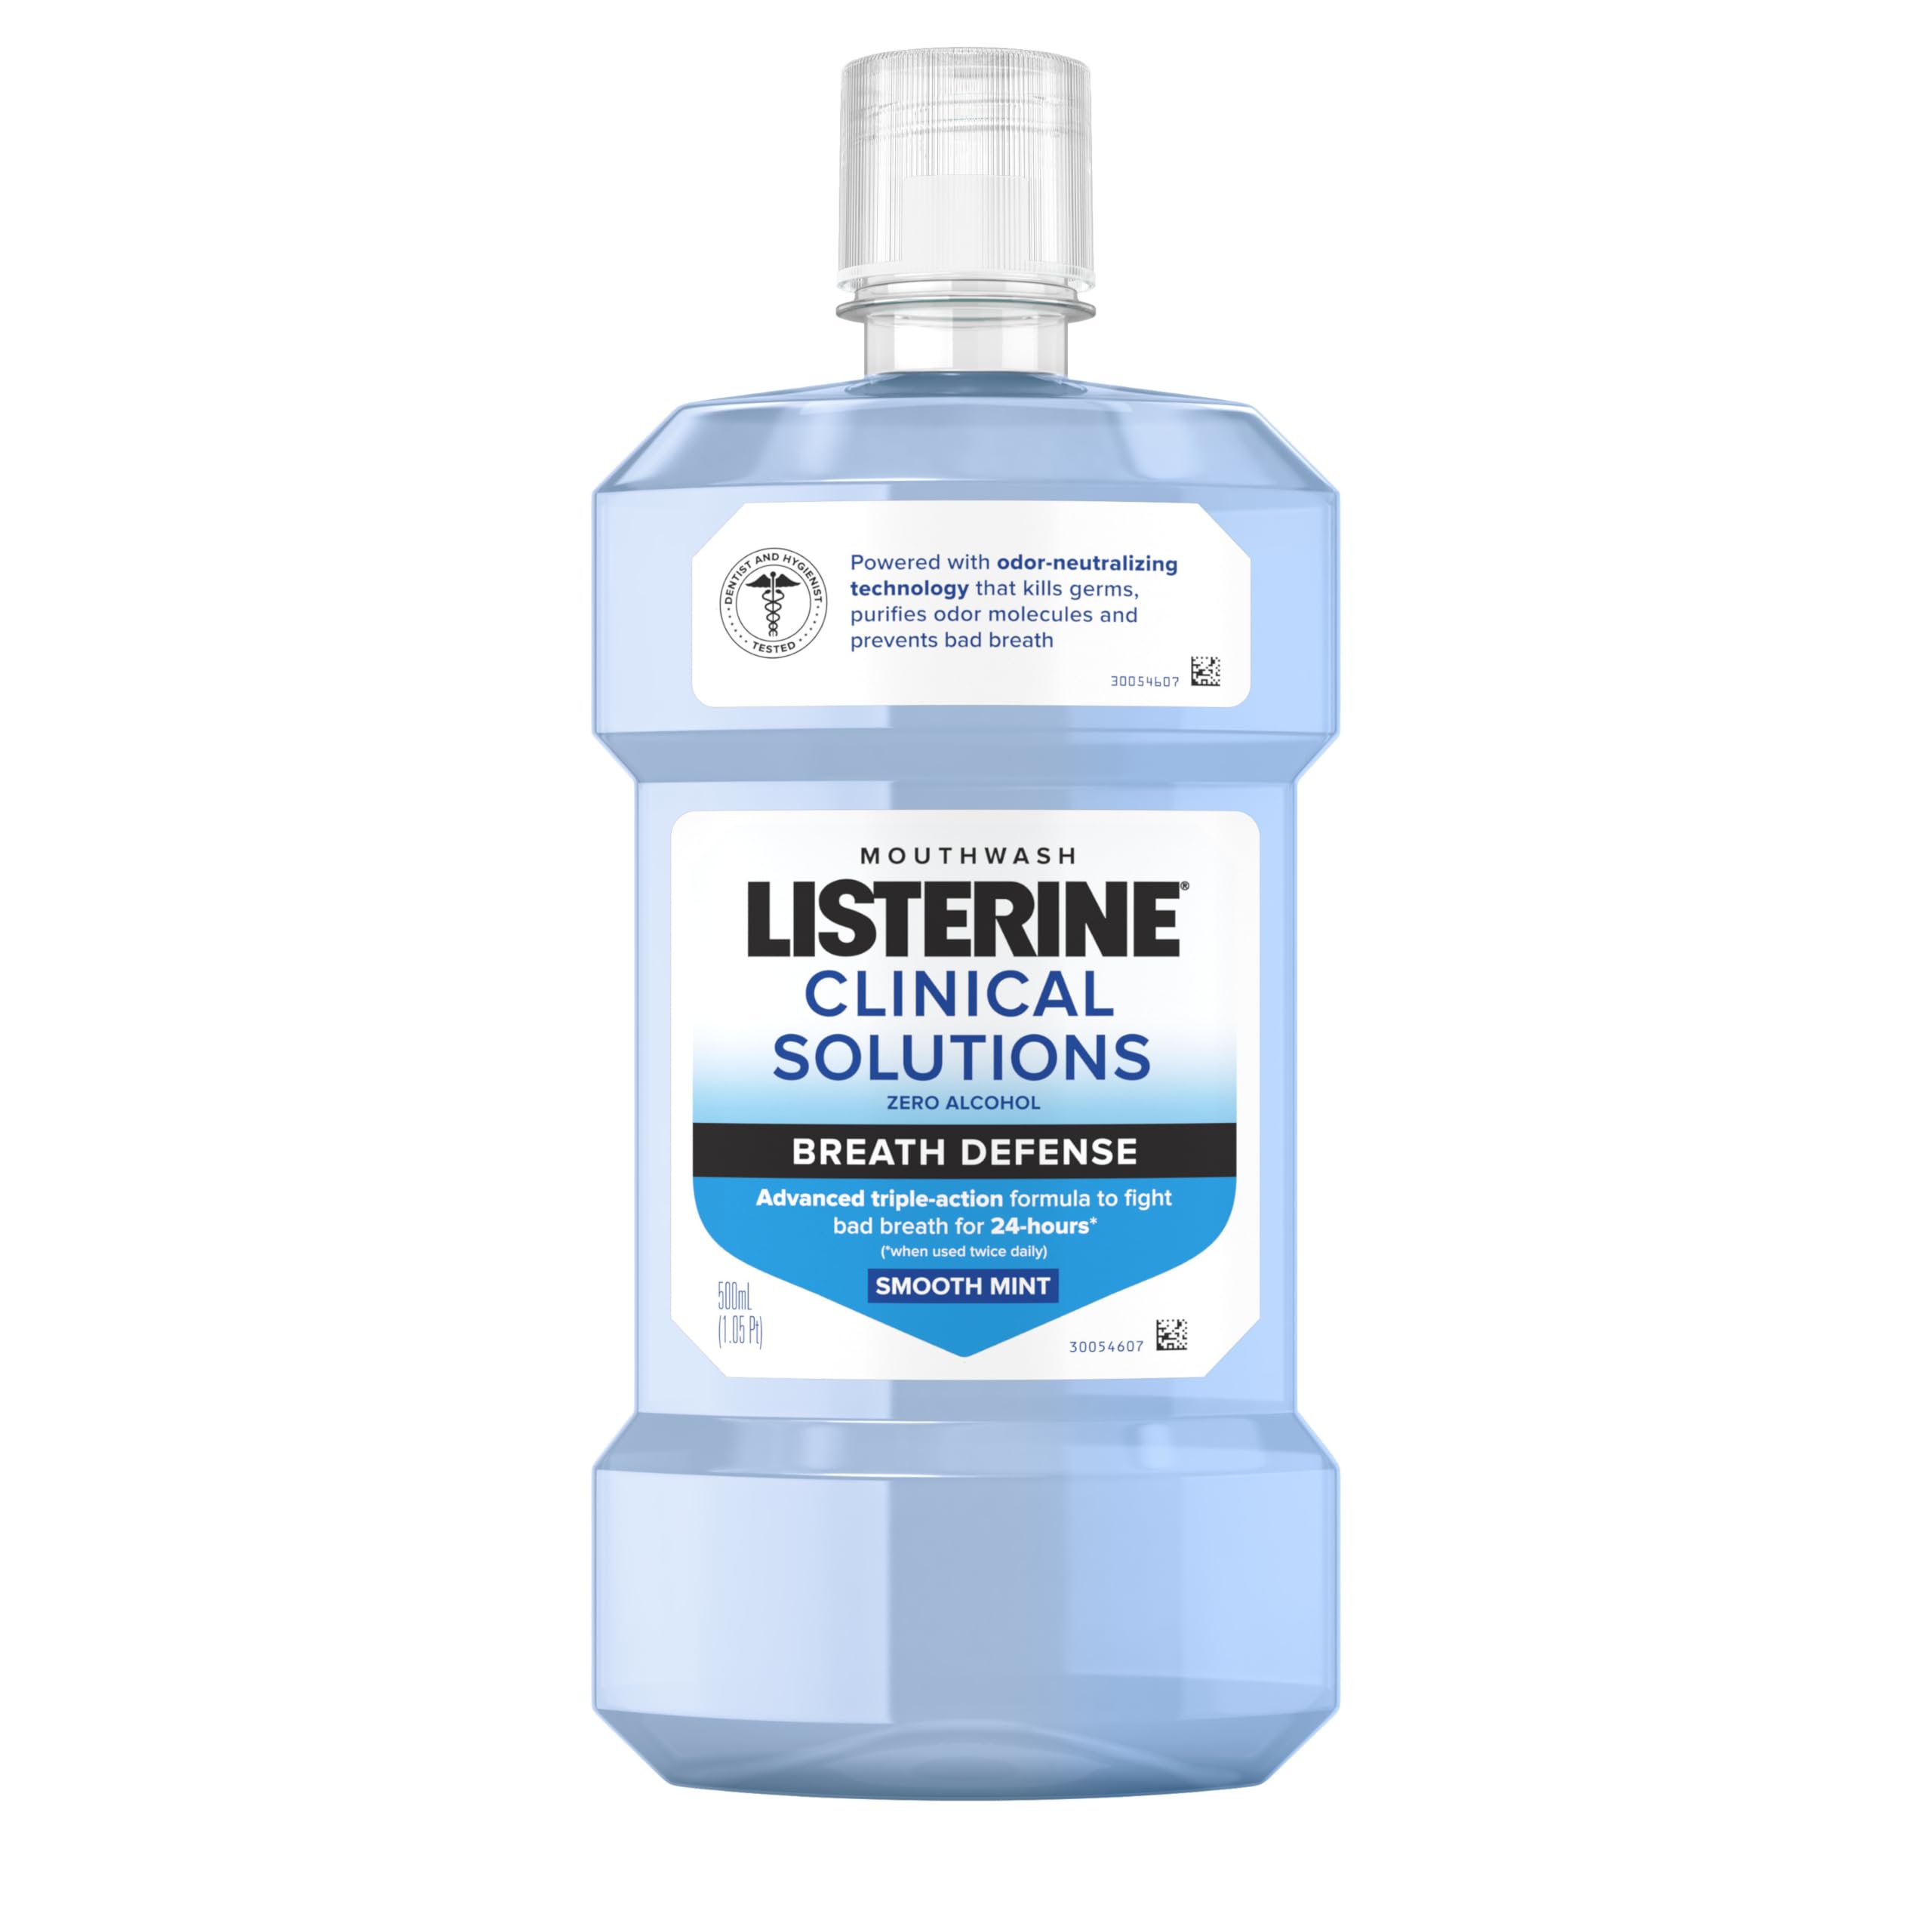 Listerine Clinical Solutions Breath Defense Zero Alcohol Mouthwash, Alcohol-Free Mouthwash with a Triple-Action Formula Fights Bad Breath for 24 Hours, Smooth Mint Oral Rinse, 500 mL